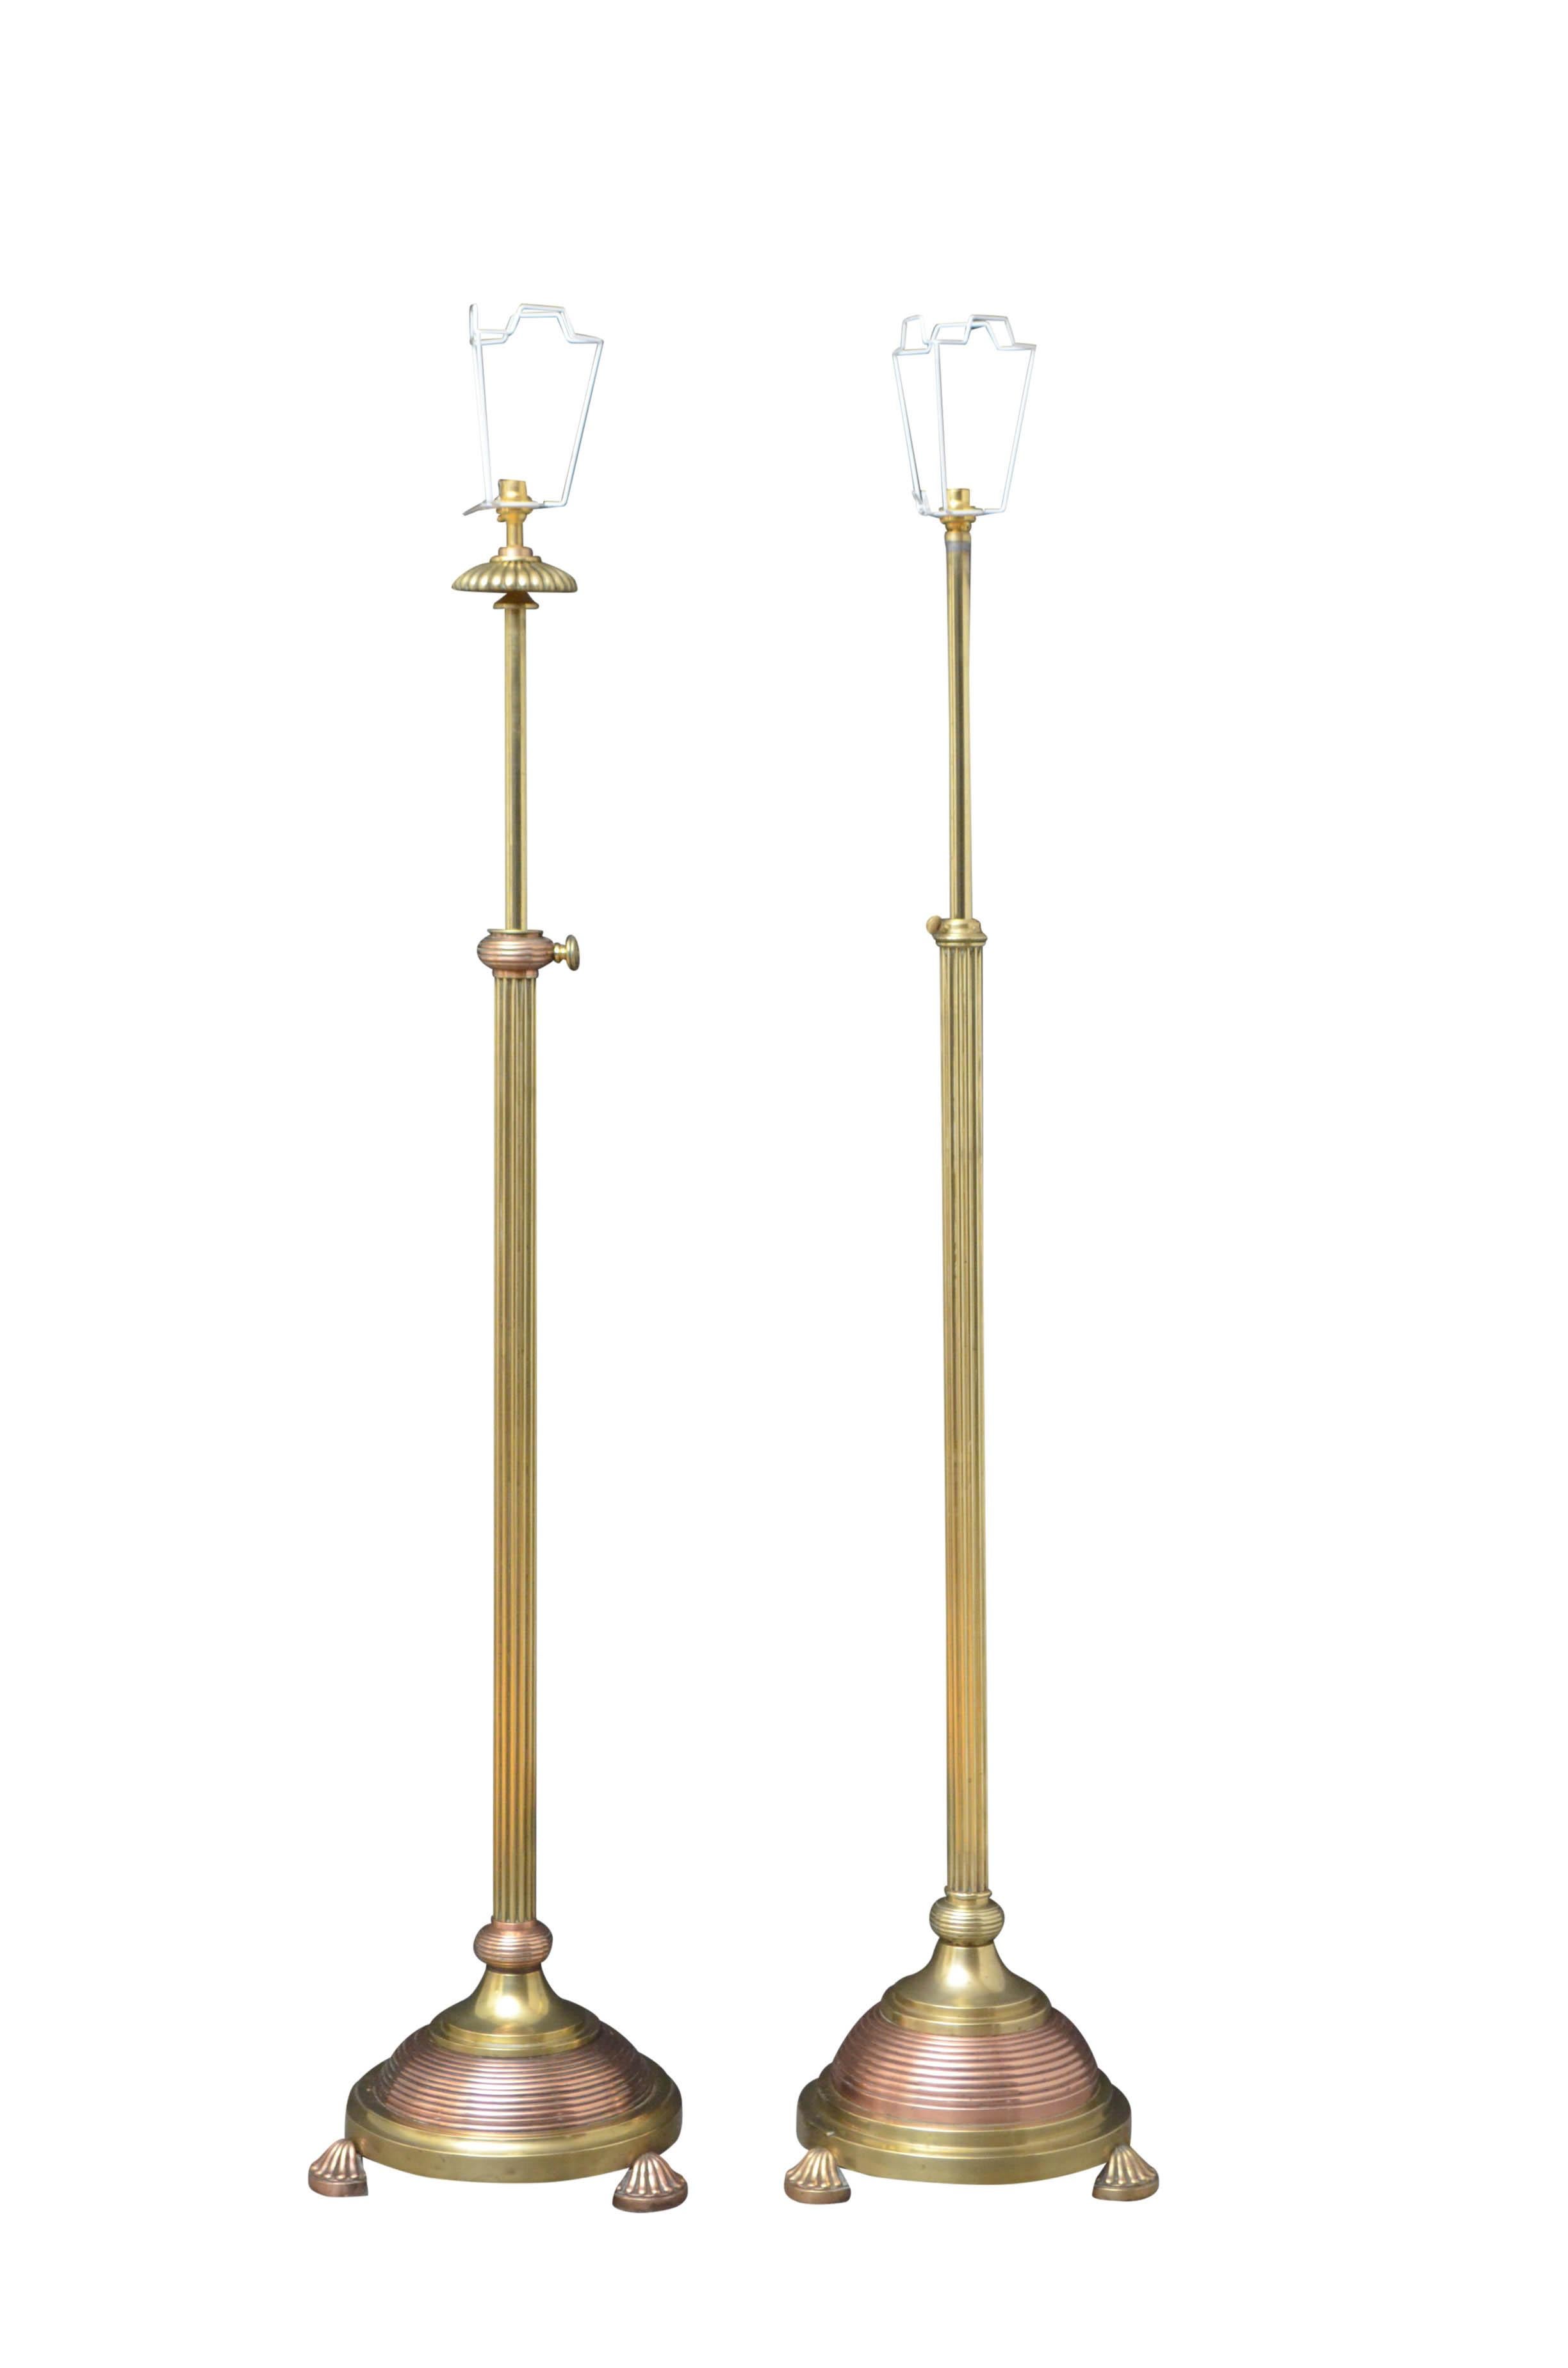 20th Century Matched Pair of Edwardian Copper And Brass Floor Standard Lamps